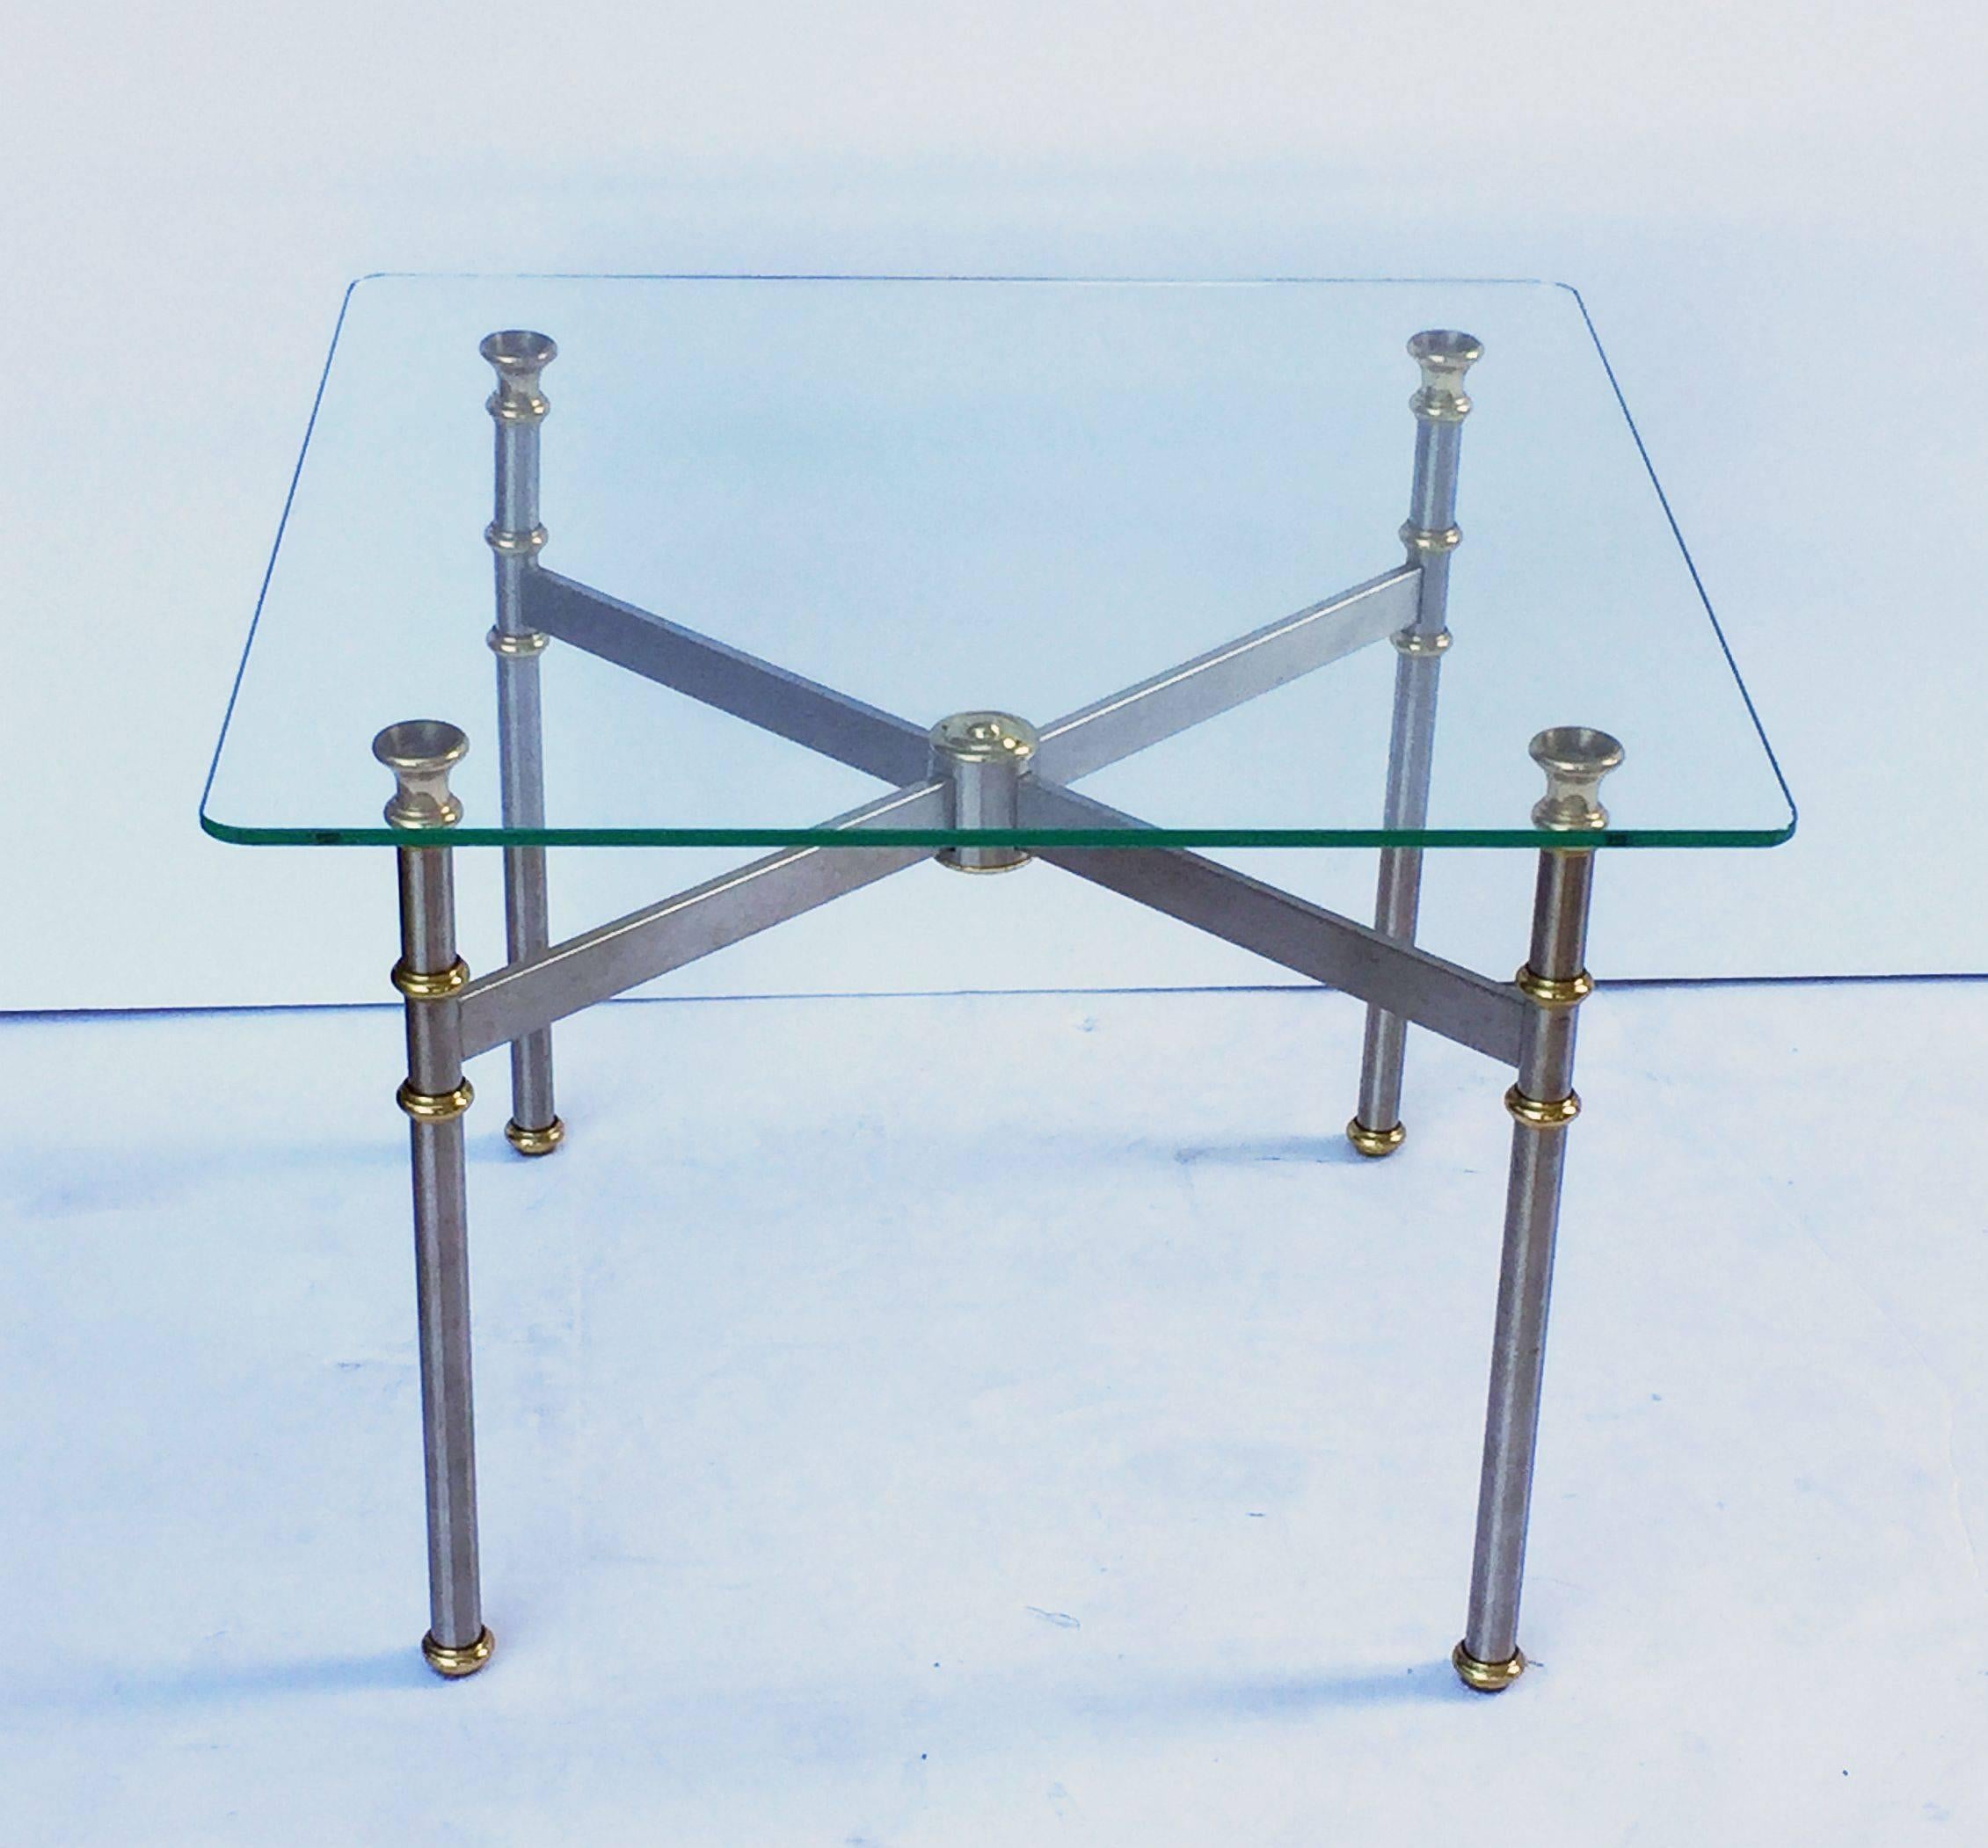 A fine French low coffee or cocktail table featuring a square clear glass top set upon a stylish base of brushed steel and brass.

Perfect for use as a cocktail or coffee table.